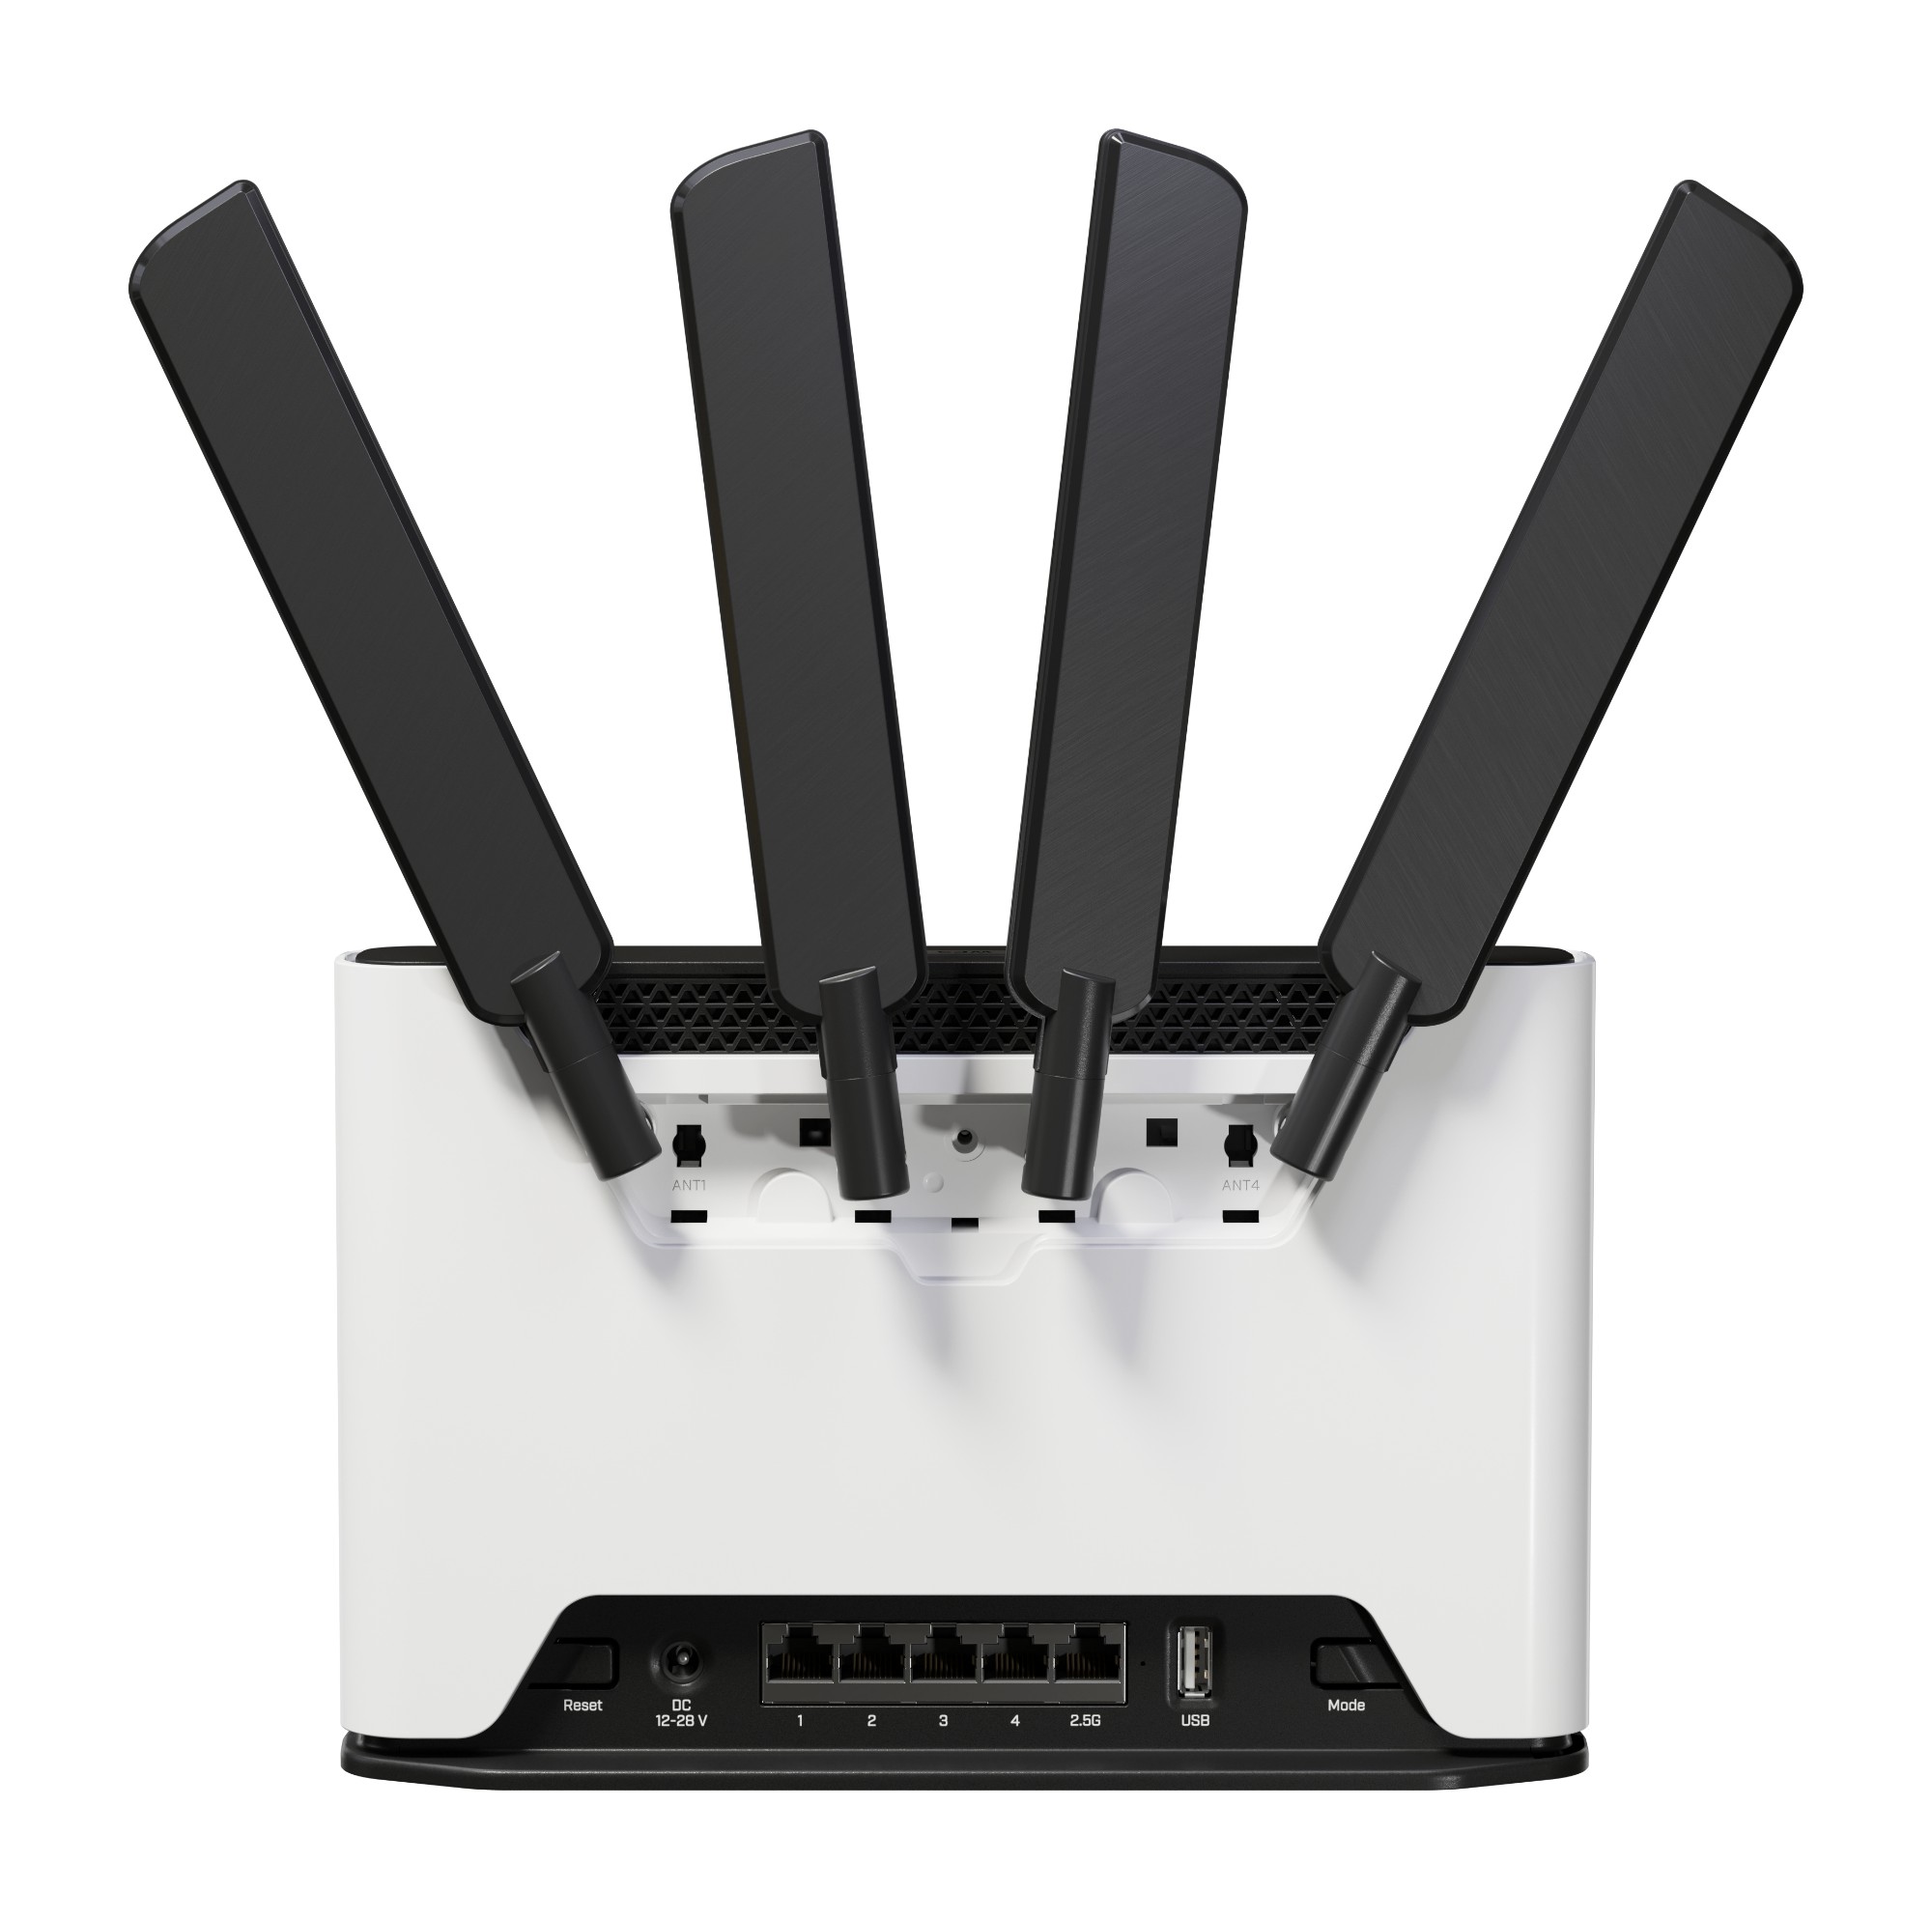 vækst egoisme Tilskynde Mikrotik Chateau 5G ax trådløs router Gigabit Ethernet Dual-band (2,4 GHz /  5 GHz) Hvid, 0 in distributor/wholesale stock for resellers to sell - Stock  In The Channel